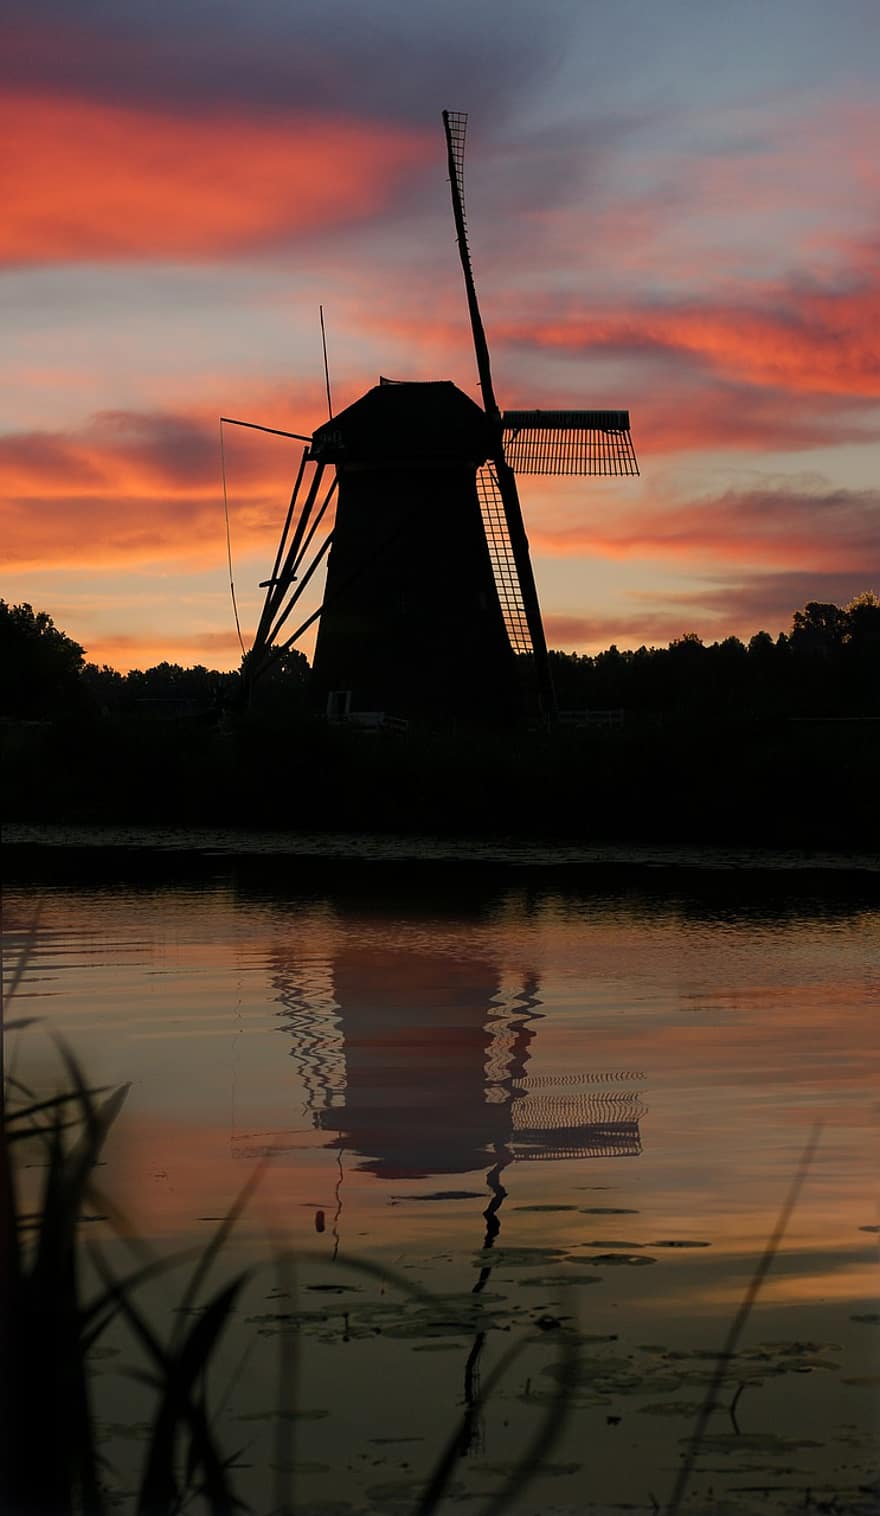 Windmill, Silhouette, Sunset, Mill, Dusk, Structure, River, Water, Countryside, Rural, rural scene